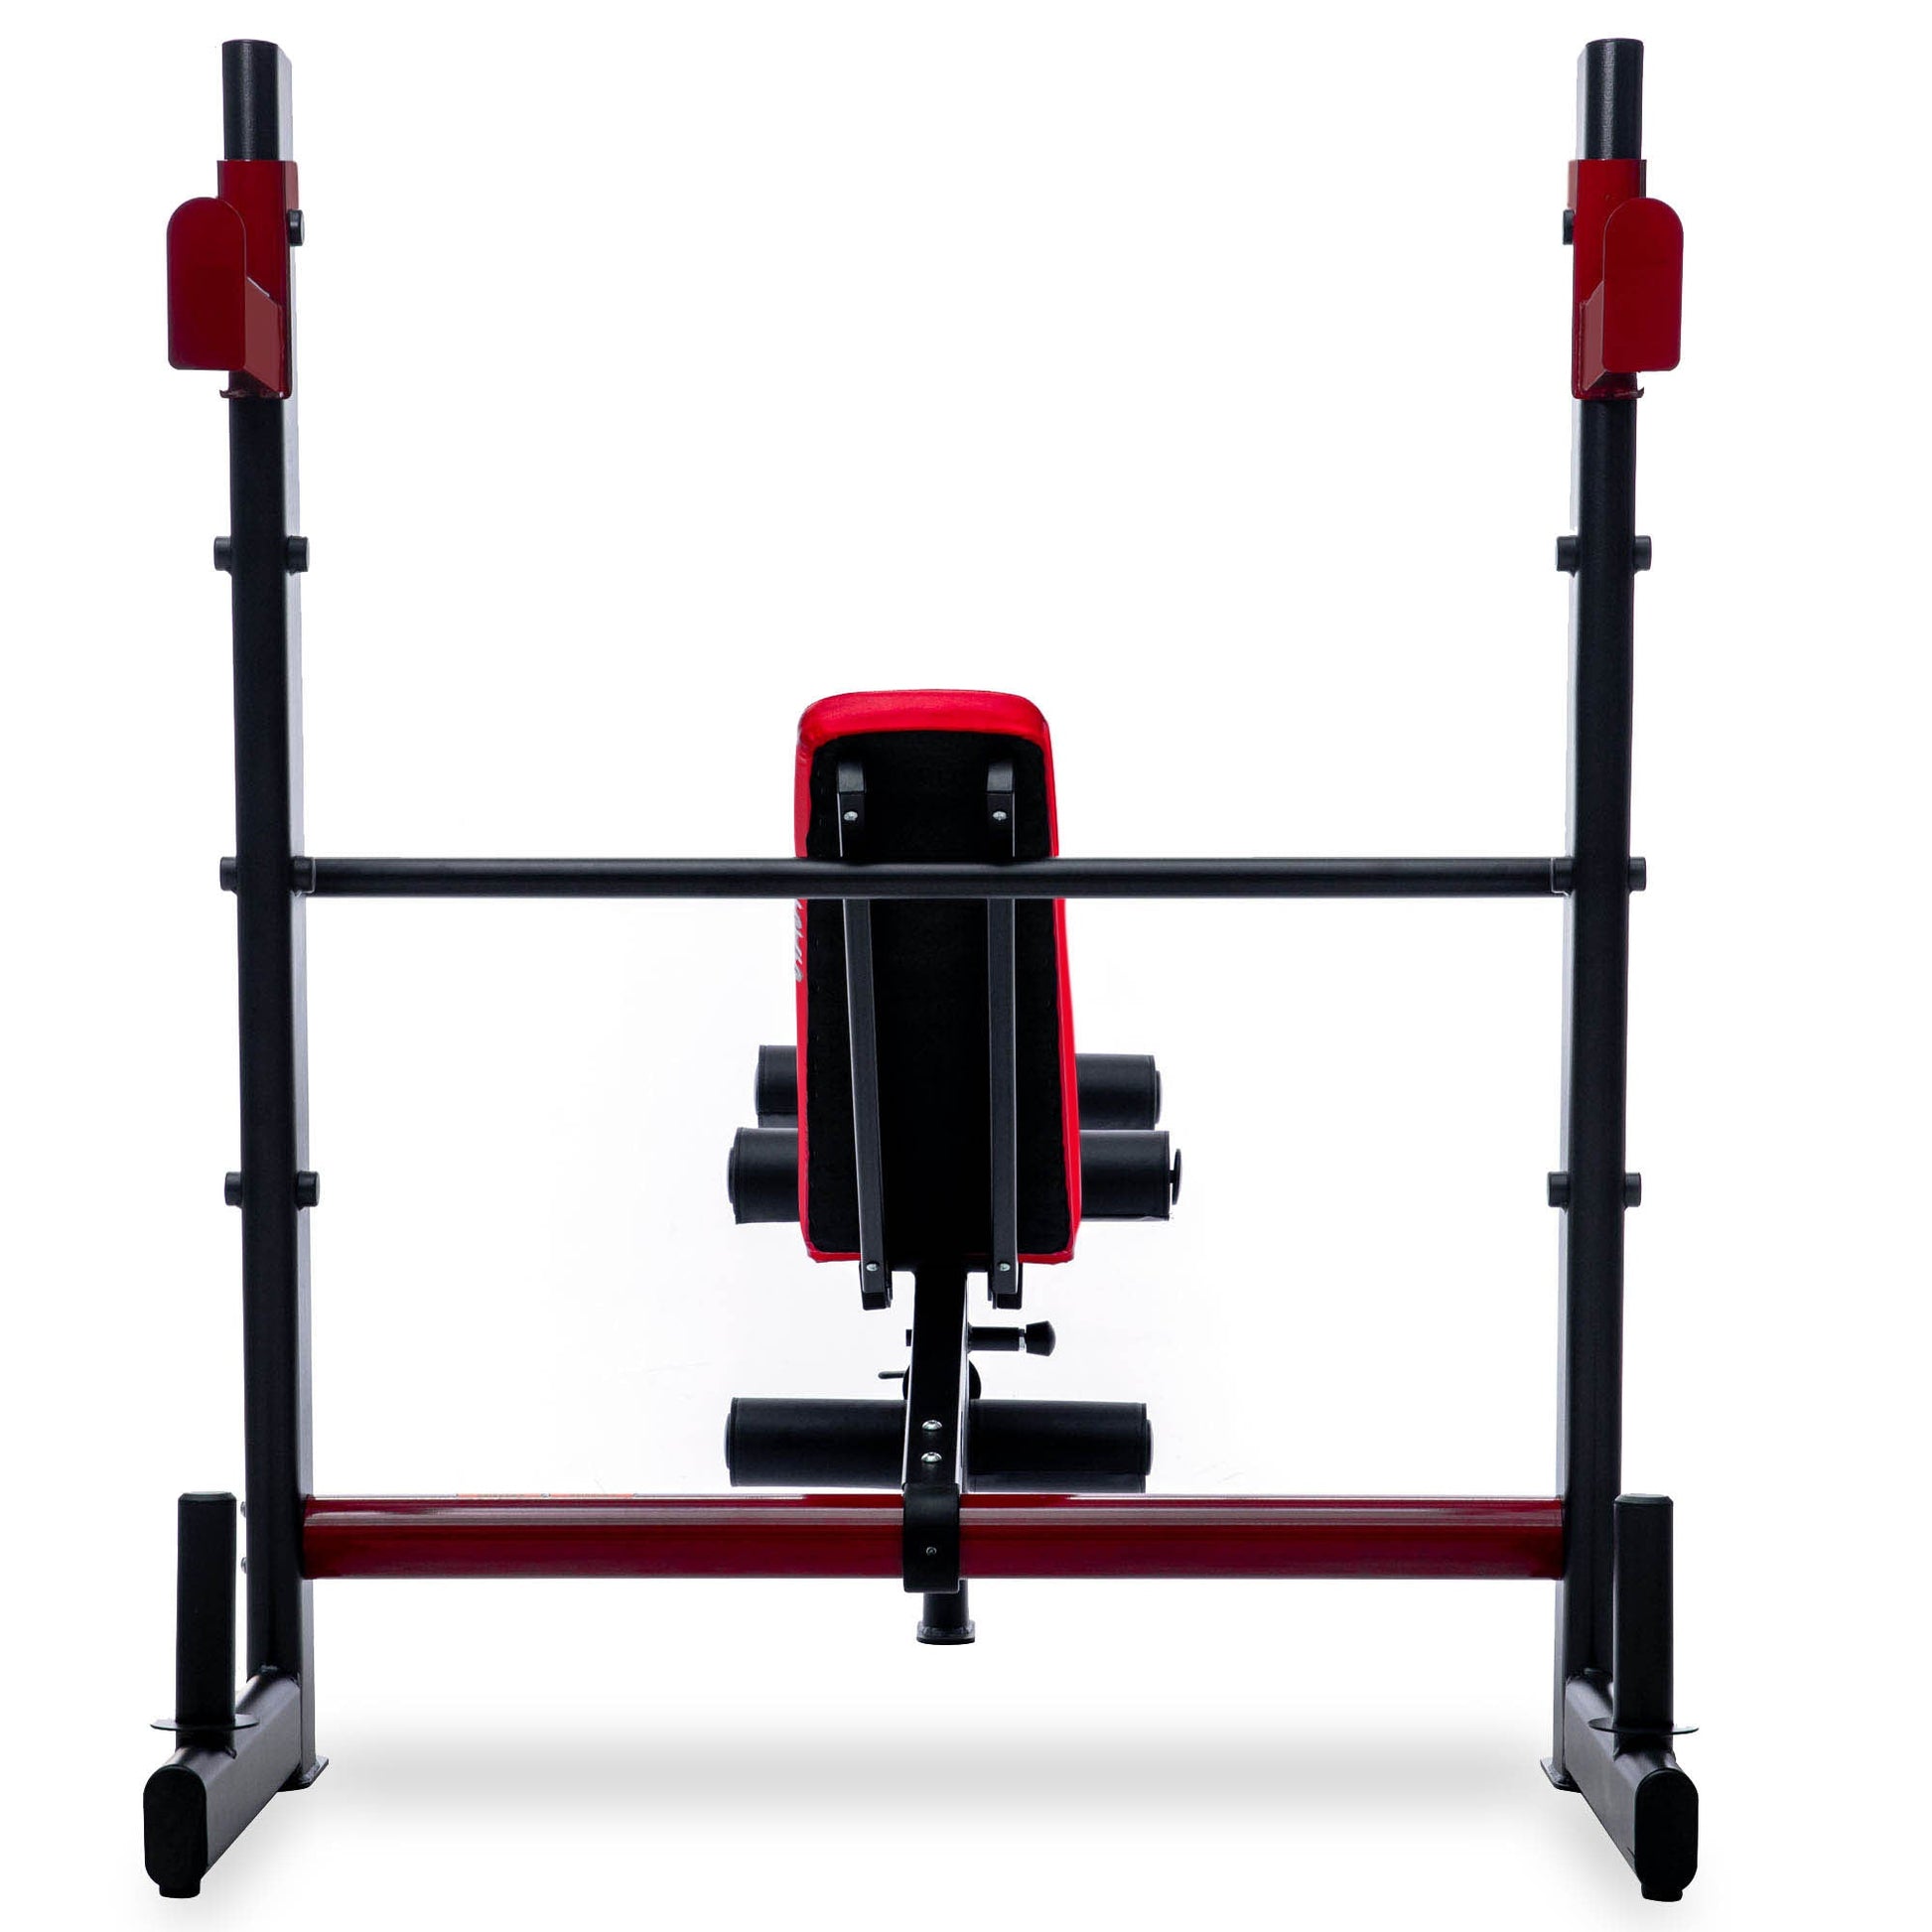 |Viavito Studio Pro 2000 Olympic Barbell Weight Bench - Back|